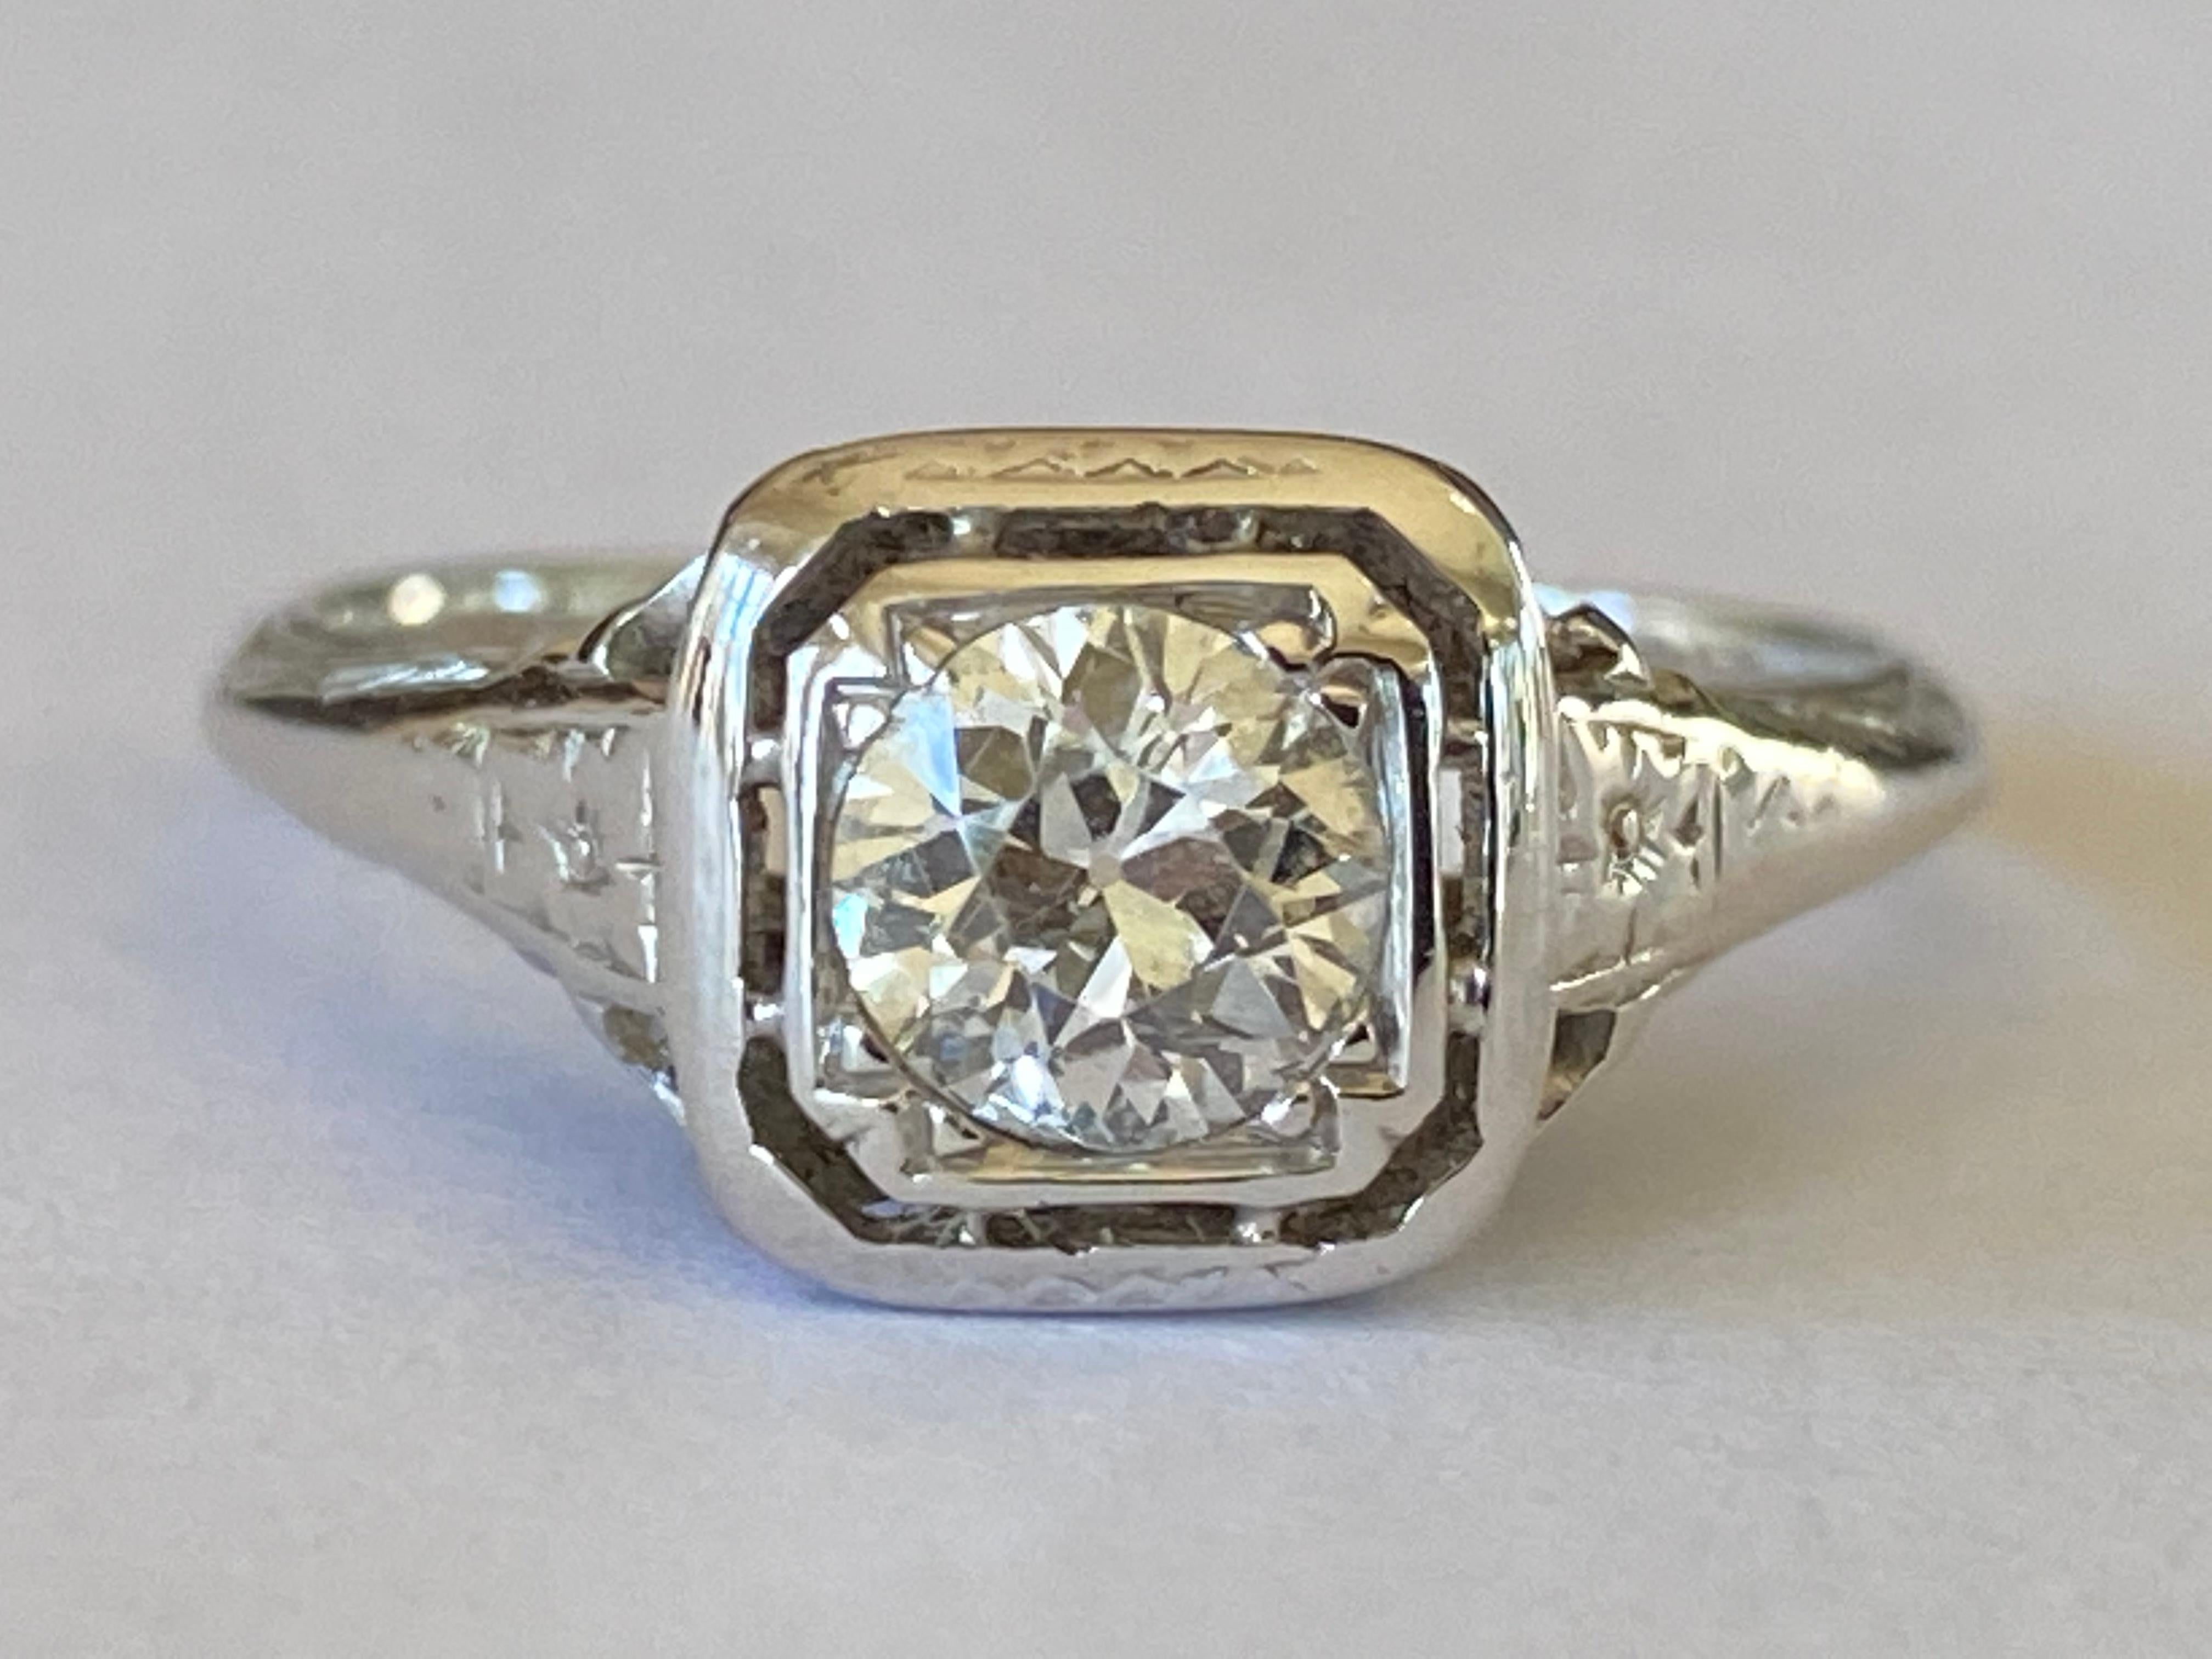 Crafted in the 1920s in 18kt white gold, this stunning Art Deco ring is designed around an Old European cut diamond center stone measuring approximately 0.55 carats, I-J color, VS clarity and a delicate filigree design. 
